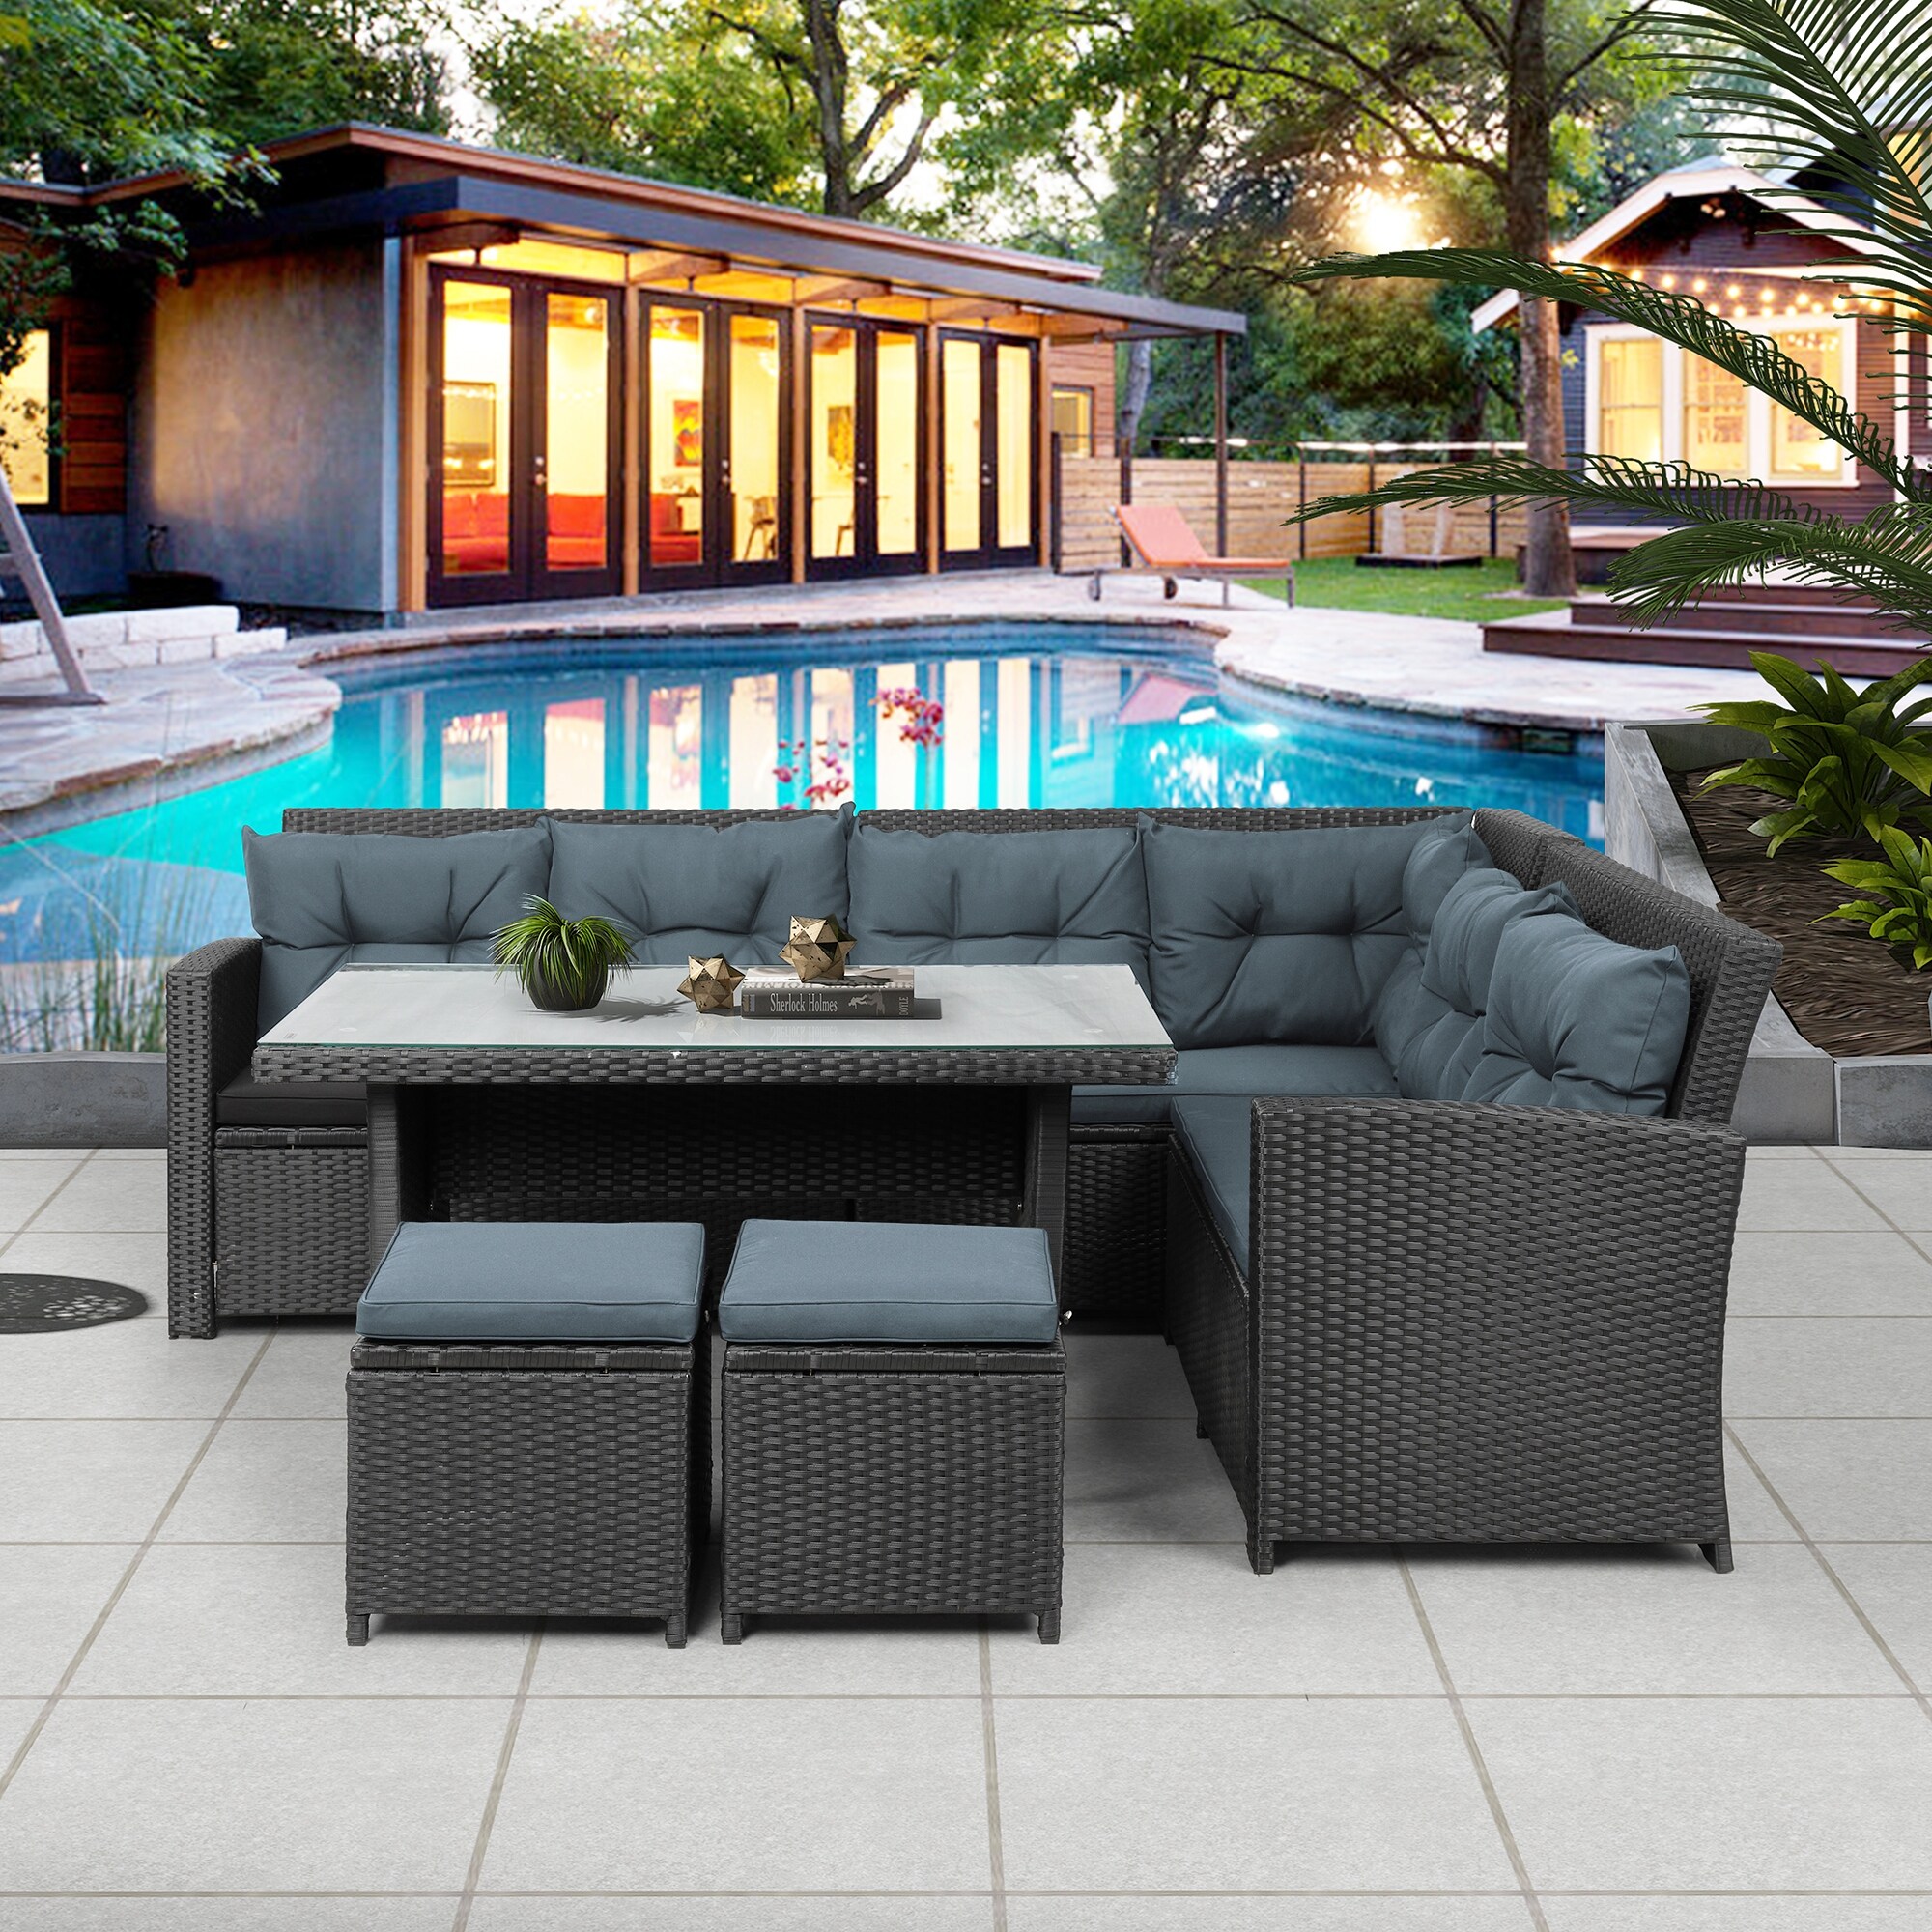 6-piece Patio Furniture Set  Outside Uv-resistant Rattan Sectional Sofa Set With Tempered Glass Table and Ottomans  For Pool